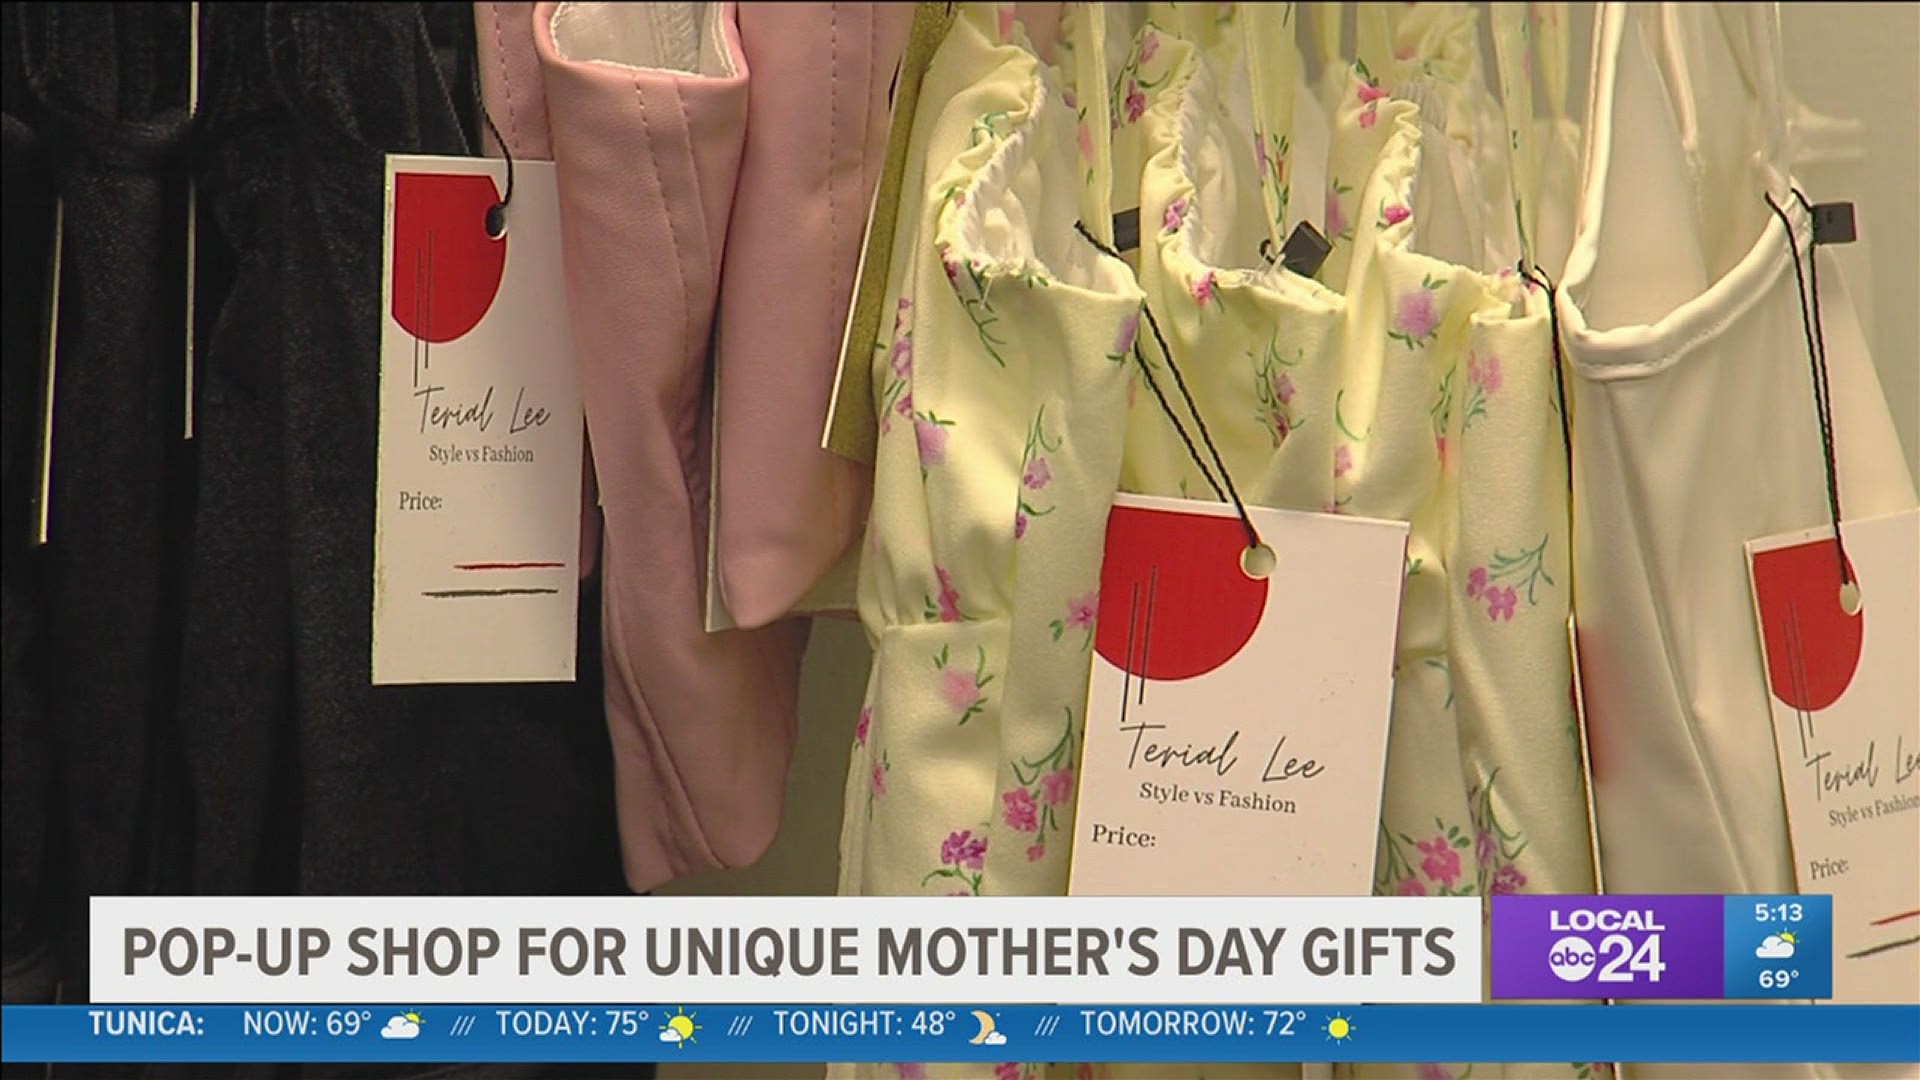 Don't forget mom this mother's day weekend! A pop-up shop is making it easy to get mom something special while supporting local.